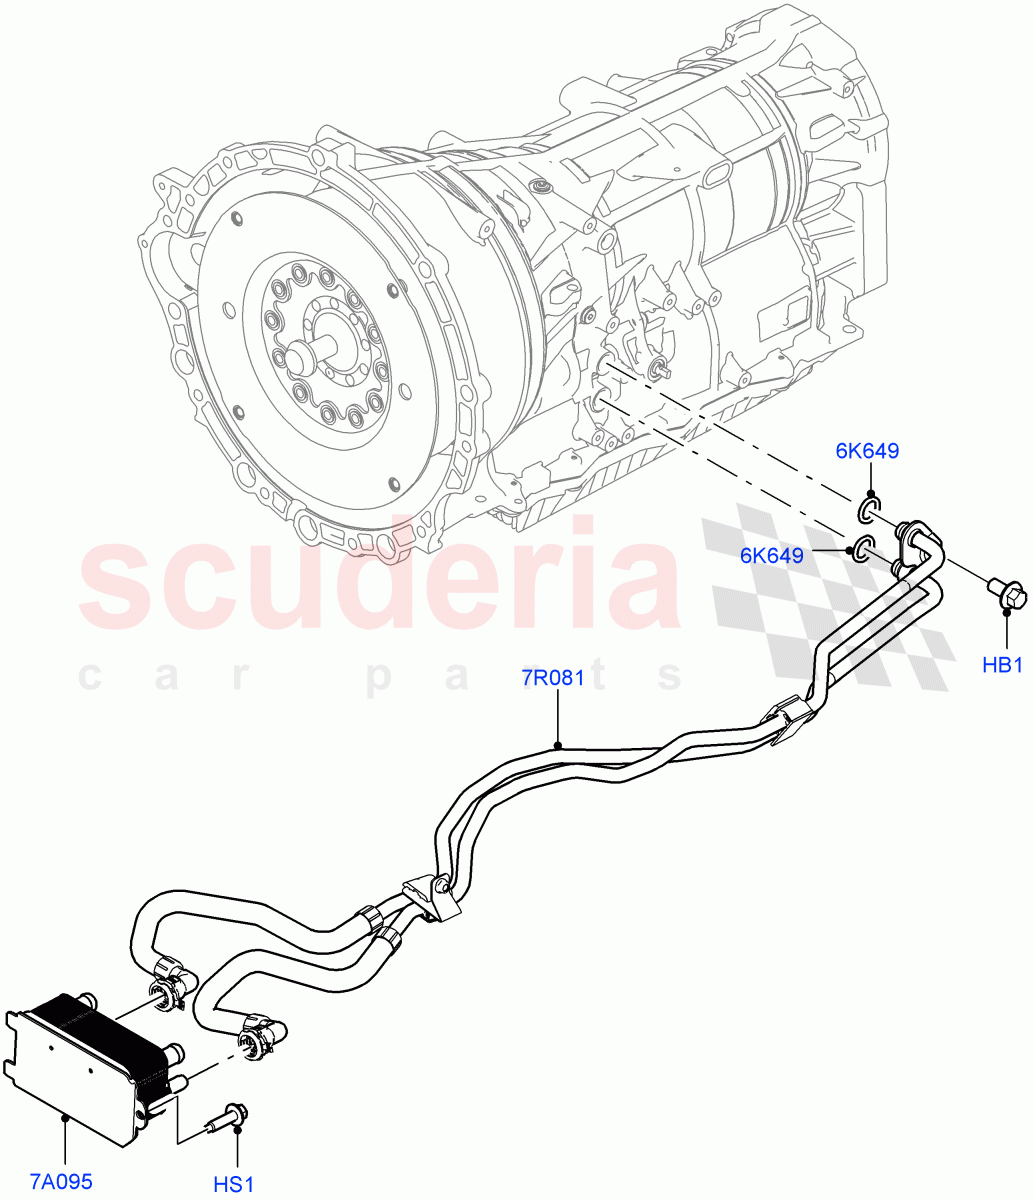 Transmission Cooling Systems(Solihull Plant Build)(2.0L I4 High DOHC AJ200 Petrol,8 Speed Auto Trans ZF 8HP45)((V)FROMJA000001) of Land Rover Land Rover Range Rover Sport (2014+) [3.0 DOHC GDI SC V6 Petrol]